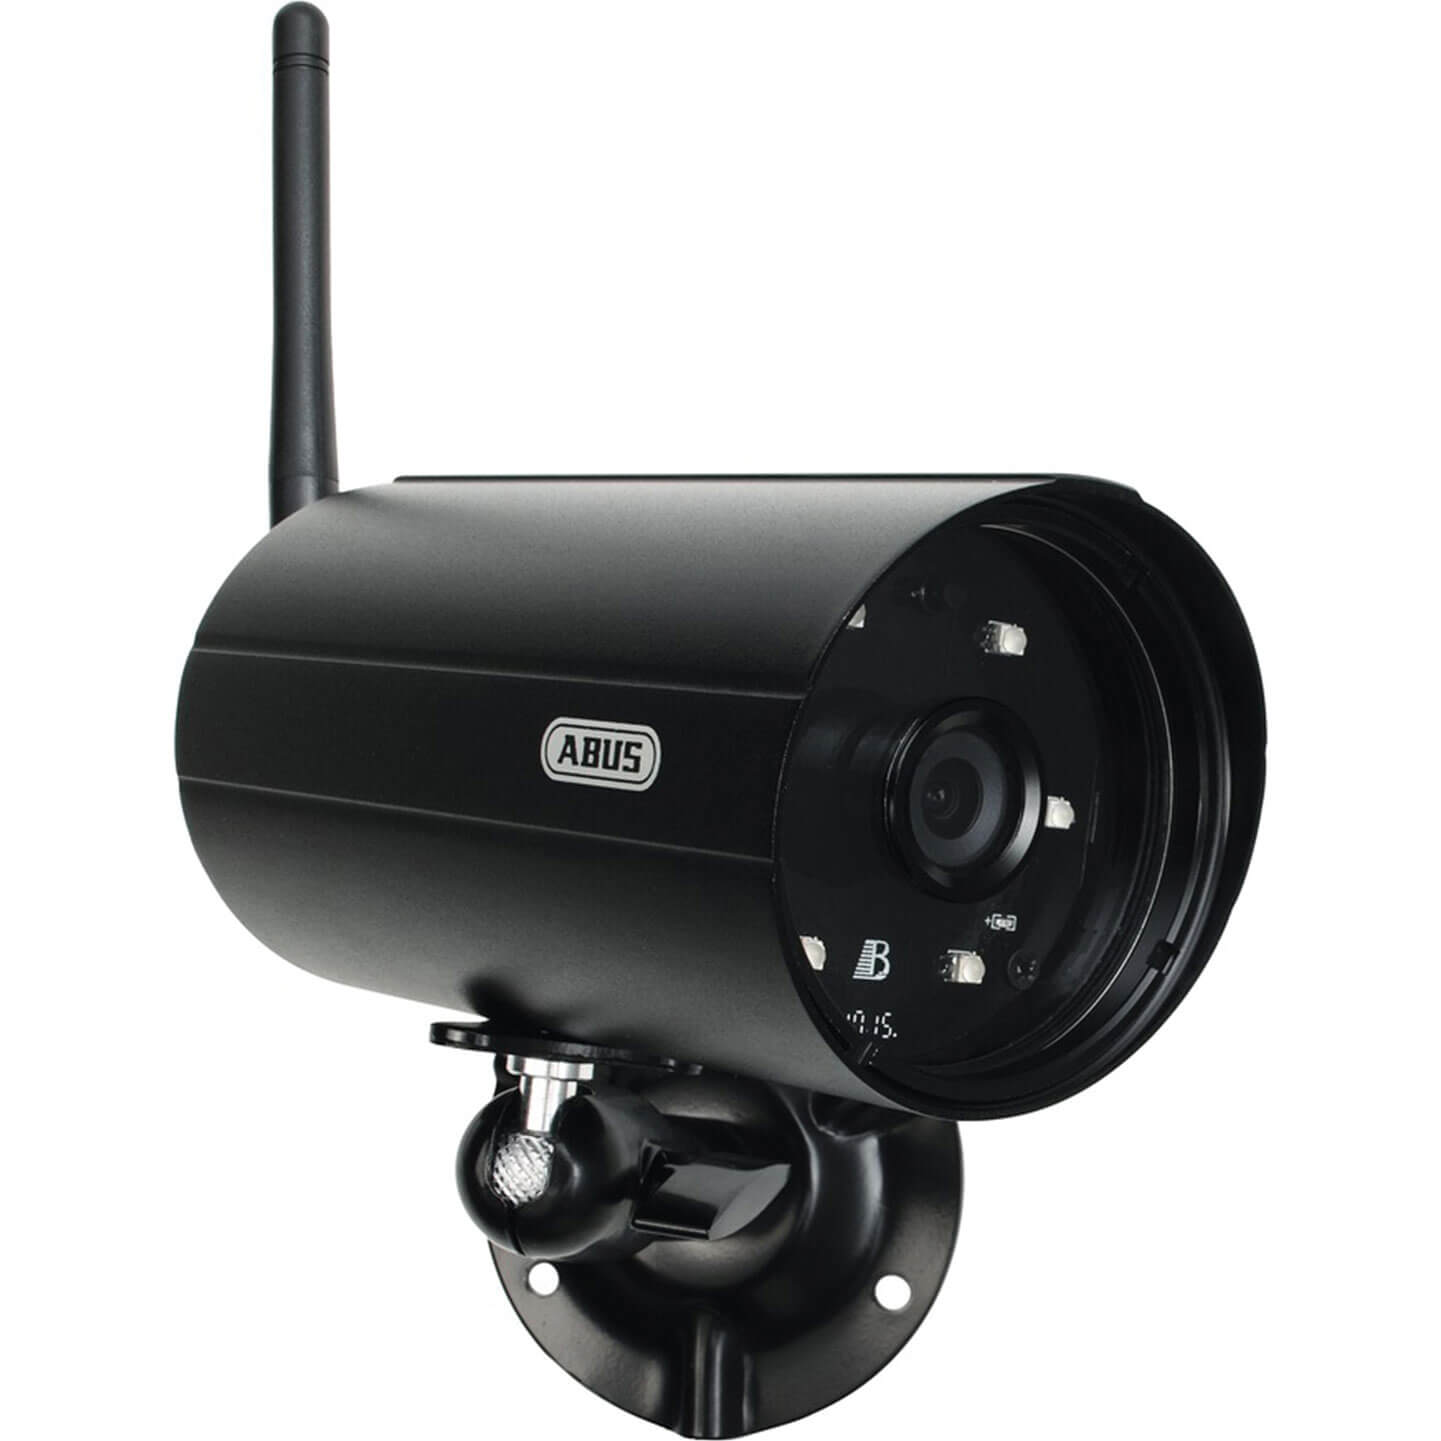 Image of Abus Security Wireless Camera for TVAC14000 Video Surveillance Kit